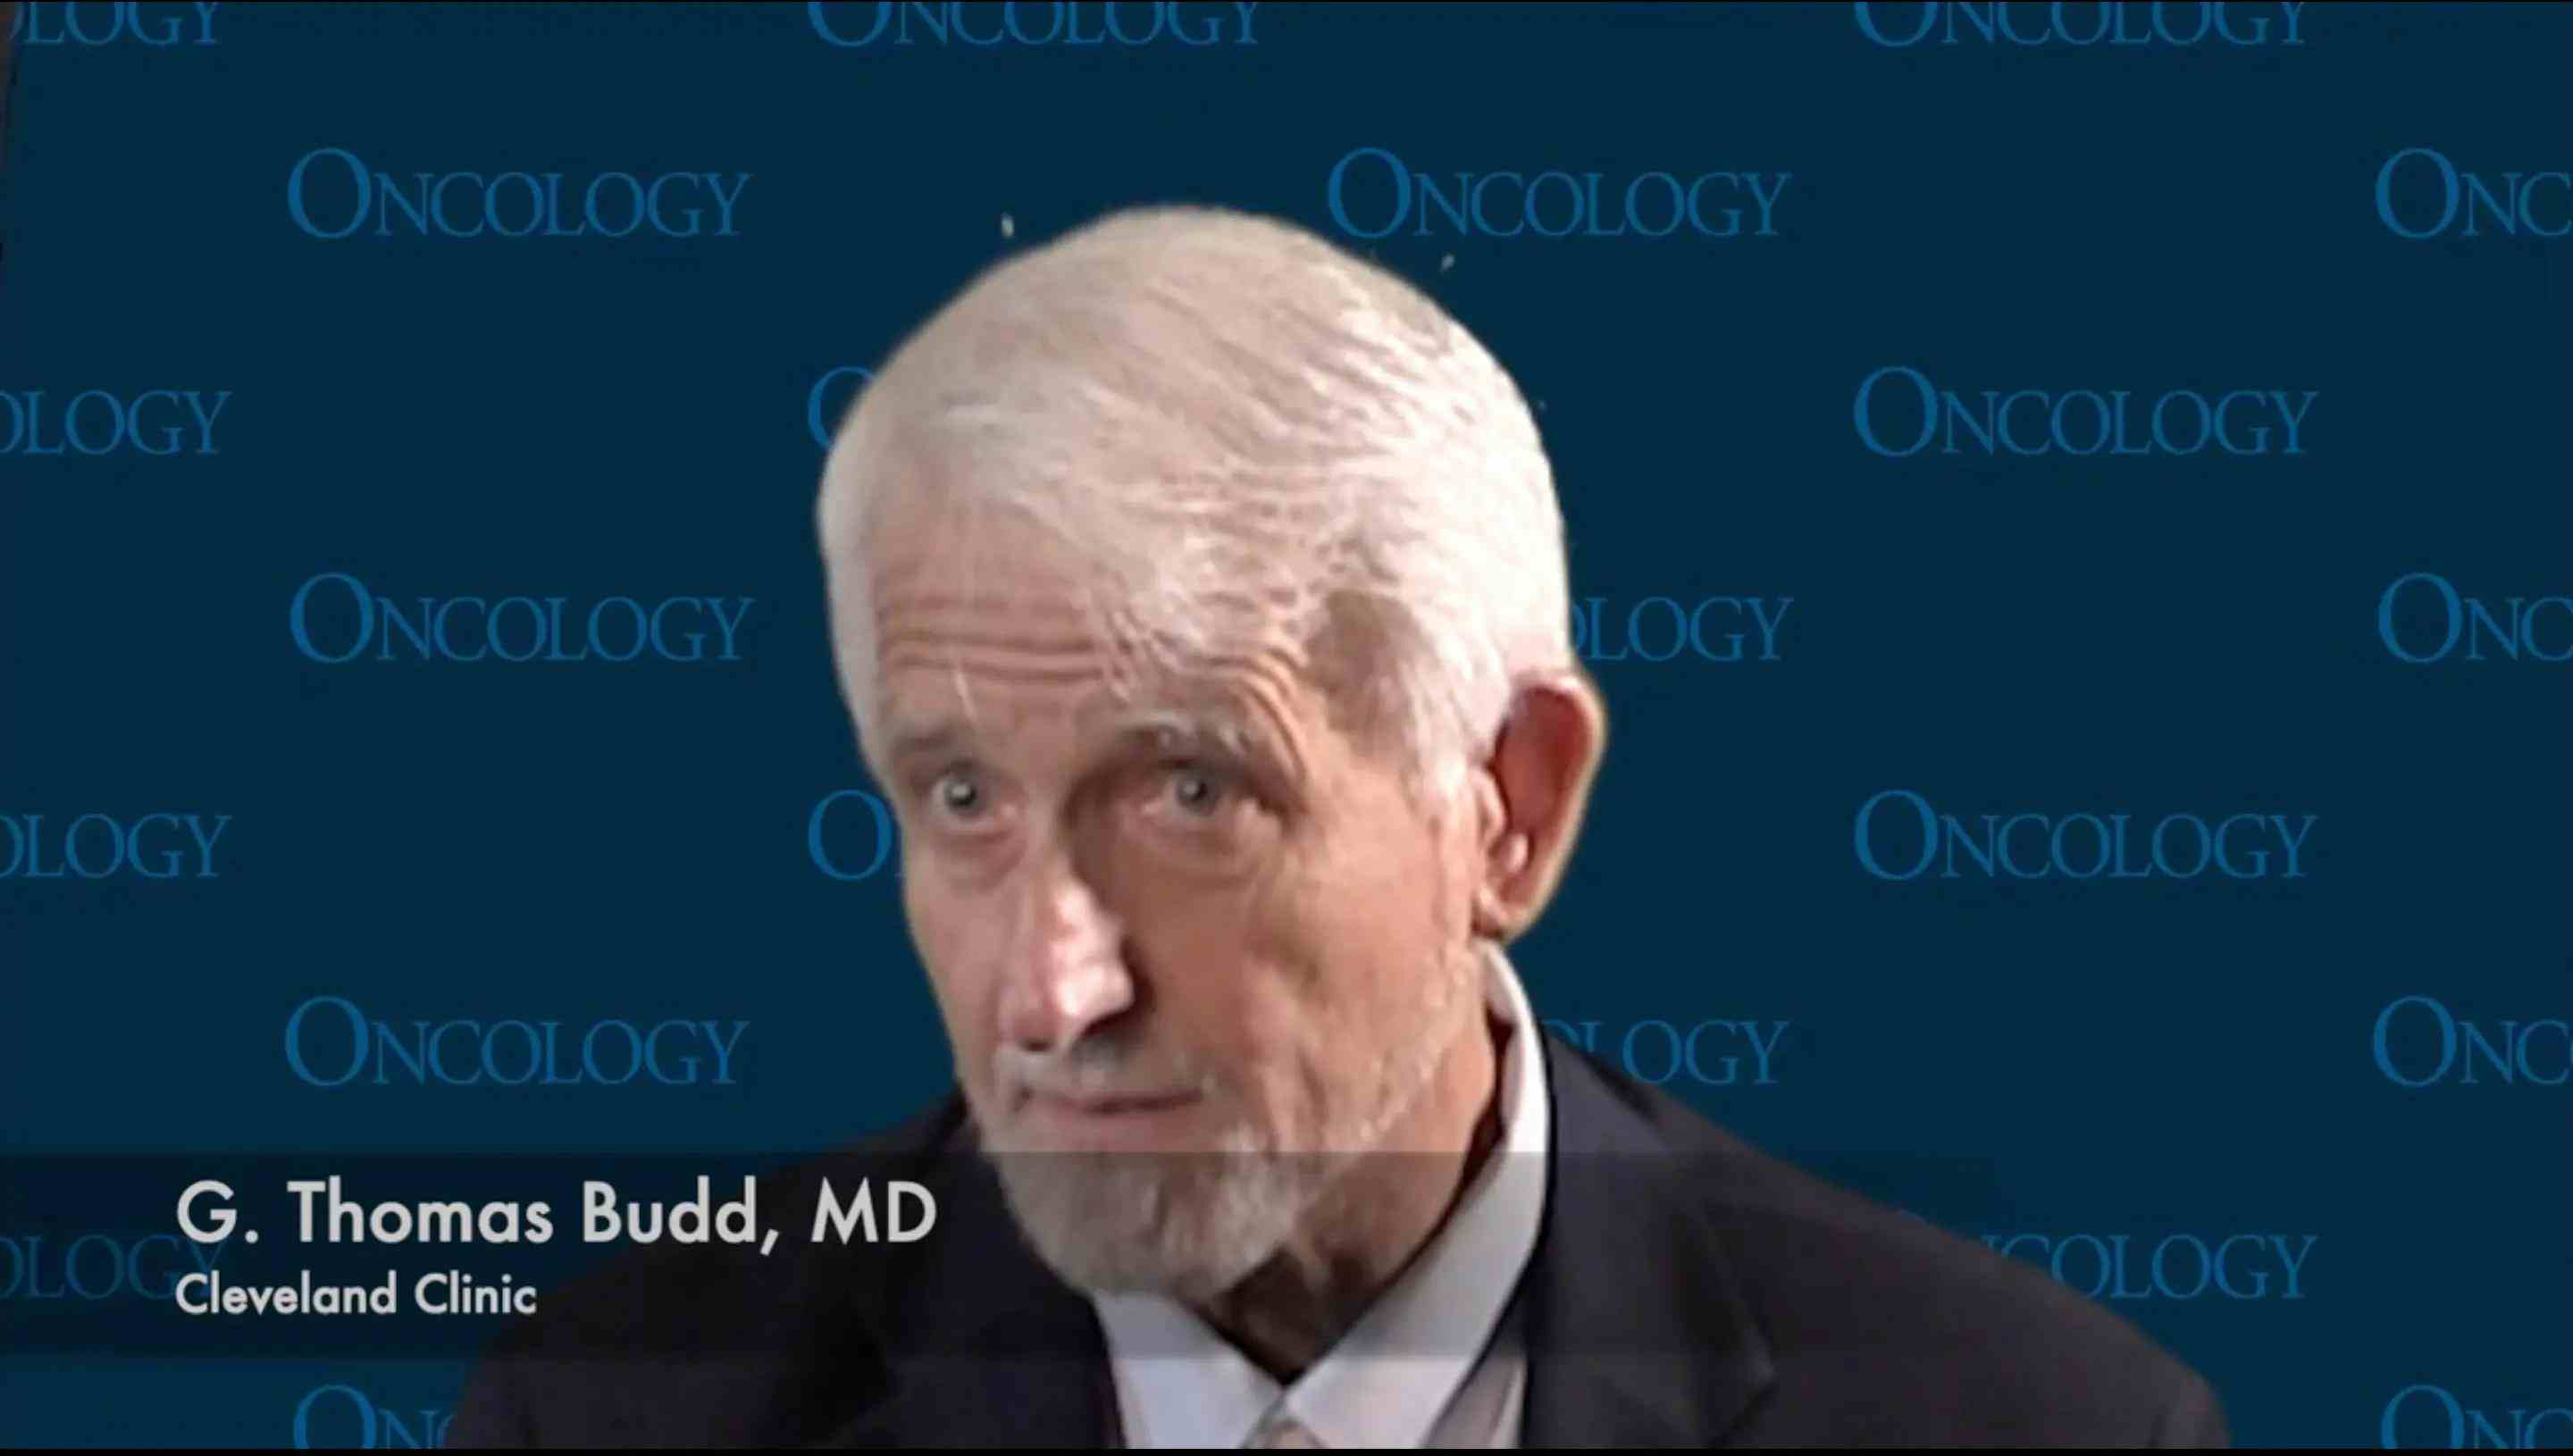 More funding is necessary for additional trials investigating the potential clinical benefit of an alpha-lactalbumin vaccine for patients with high-risk operable triple-negative breast cancer and those at high risk of developing the disease, says G. Thomas Budd, MD.